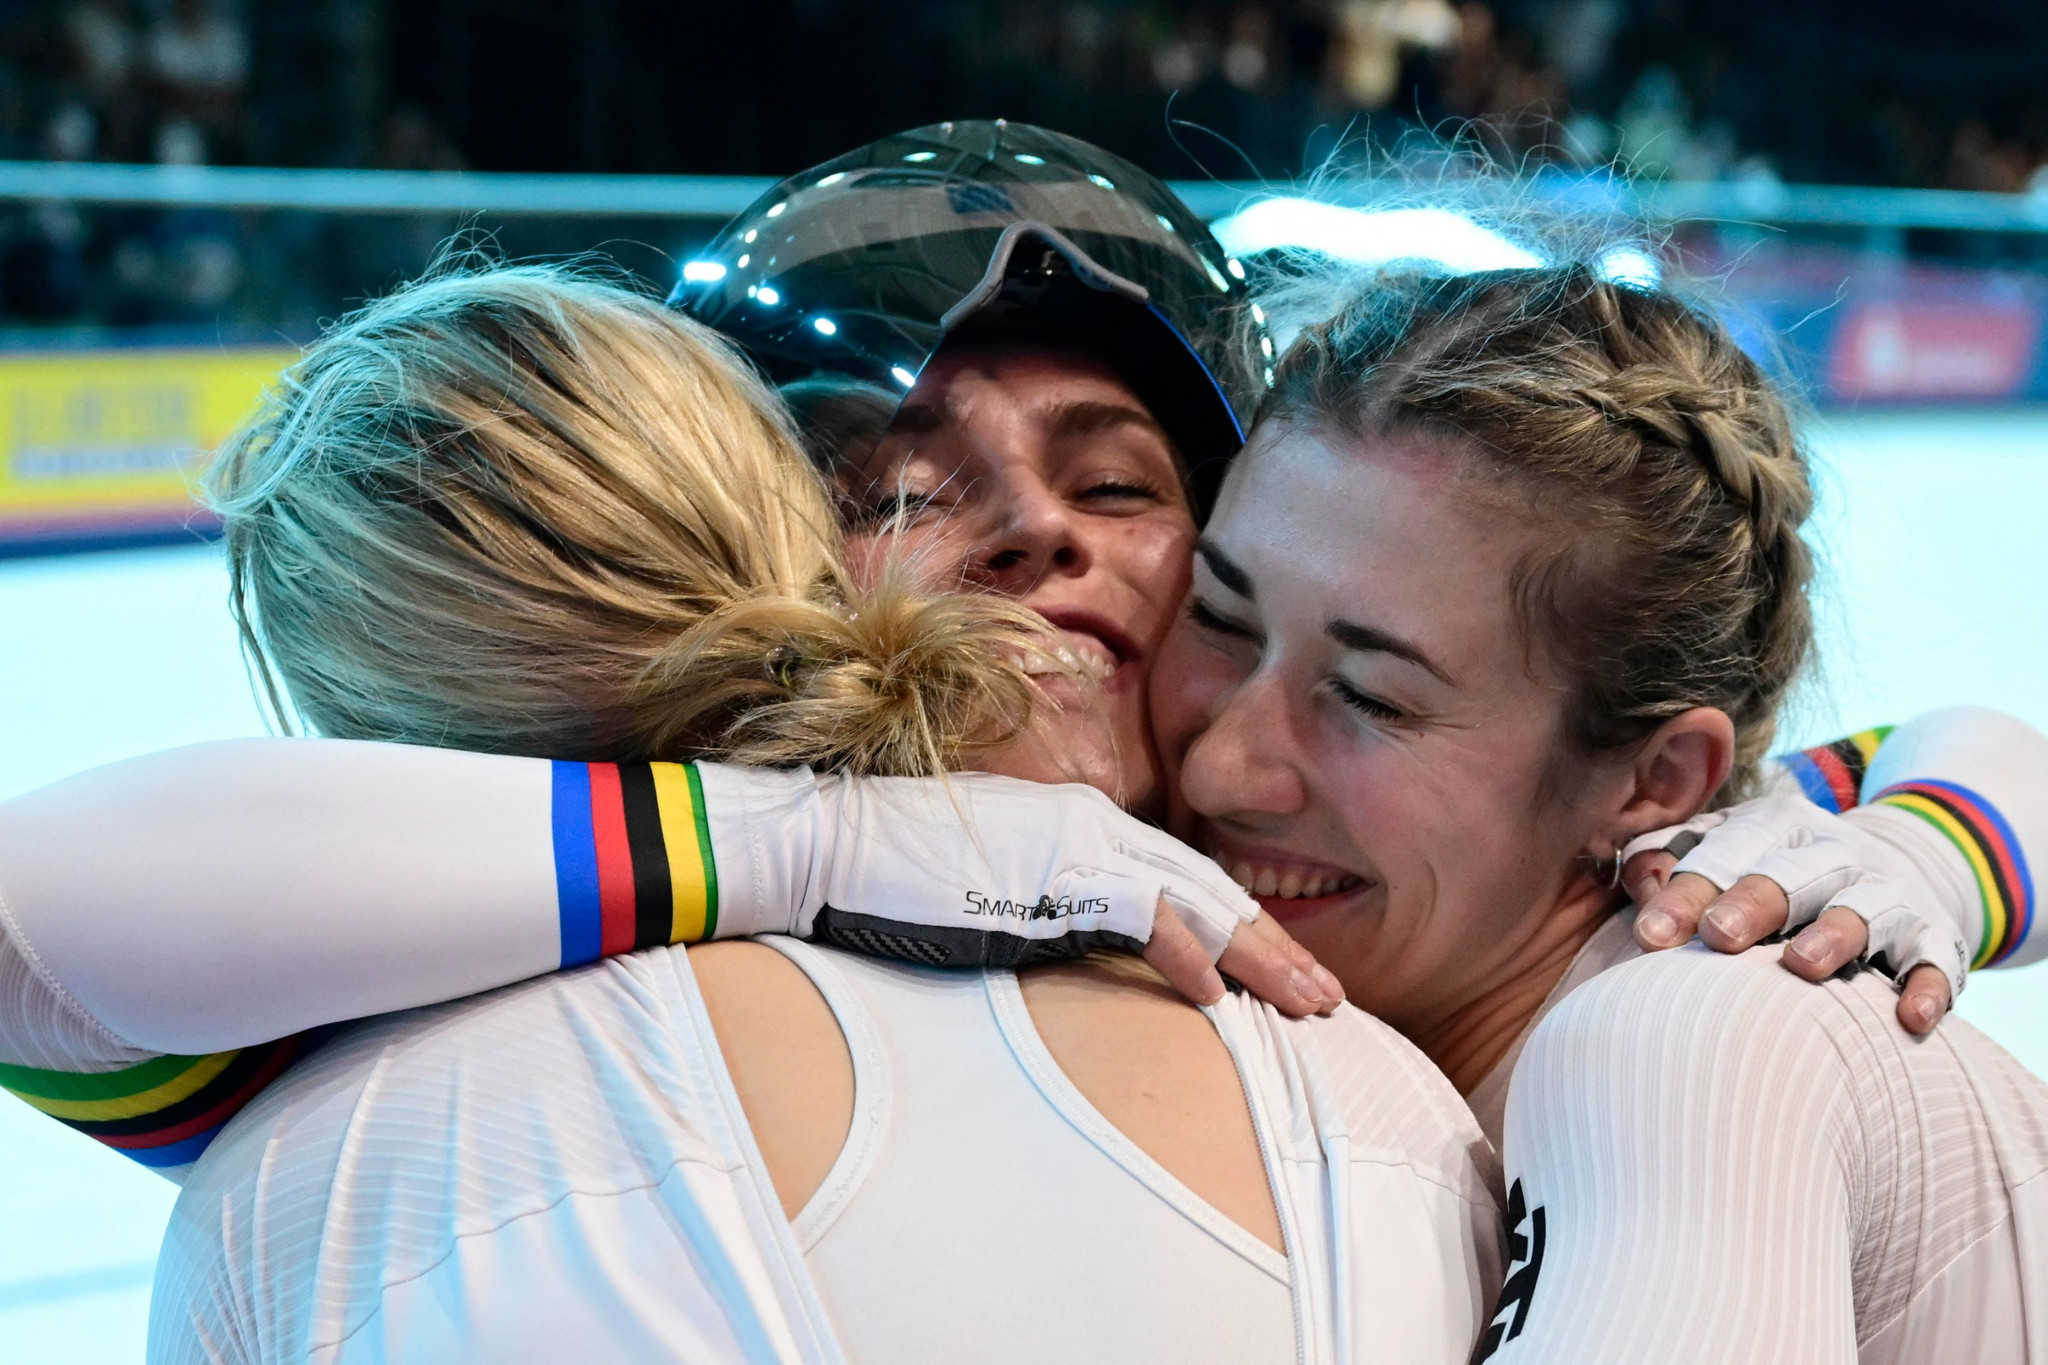 Germany's women took the European team sprint title for the first time ©Getty Images